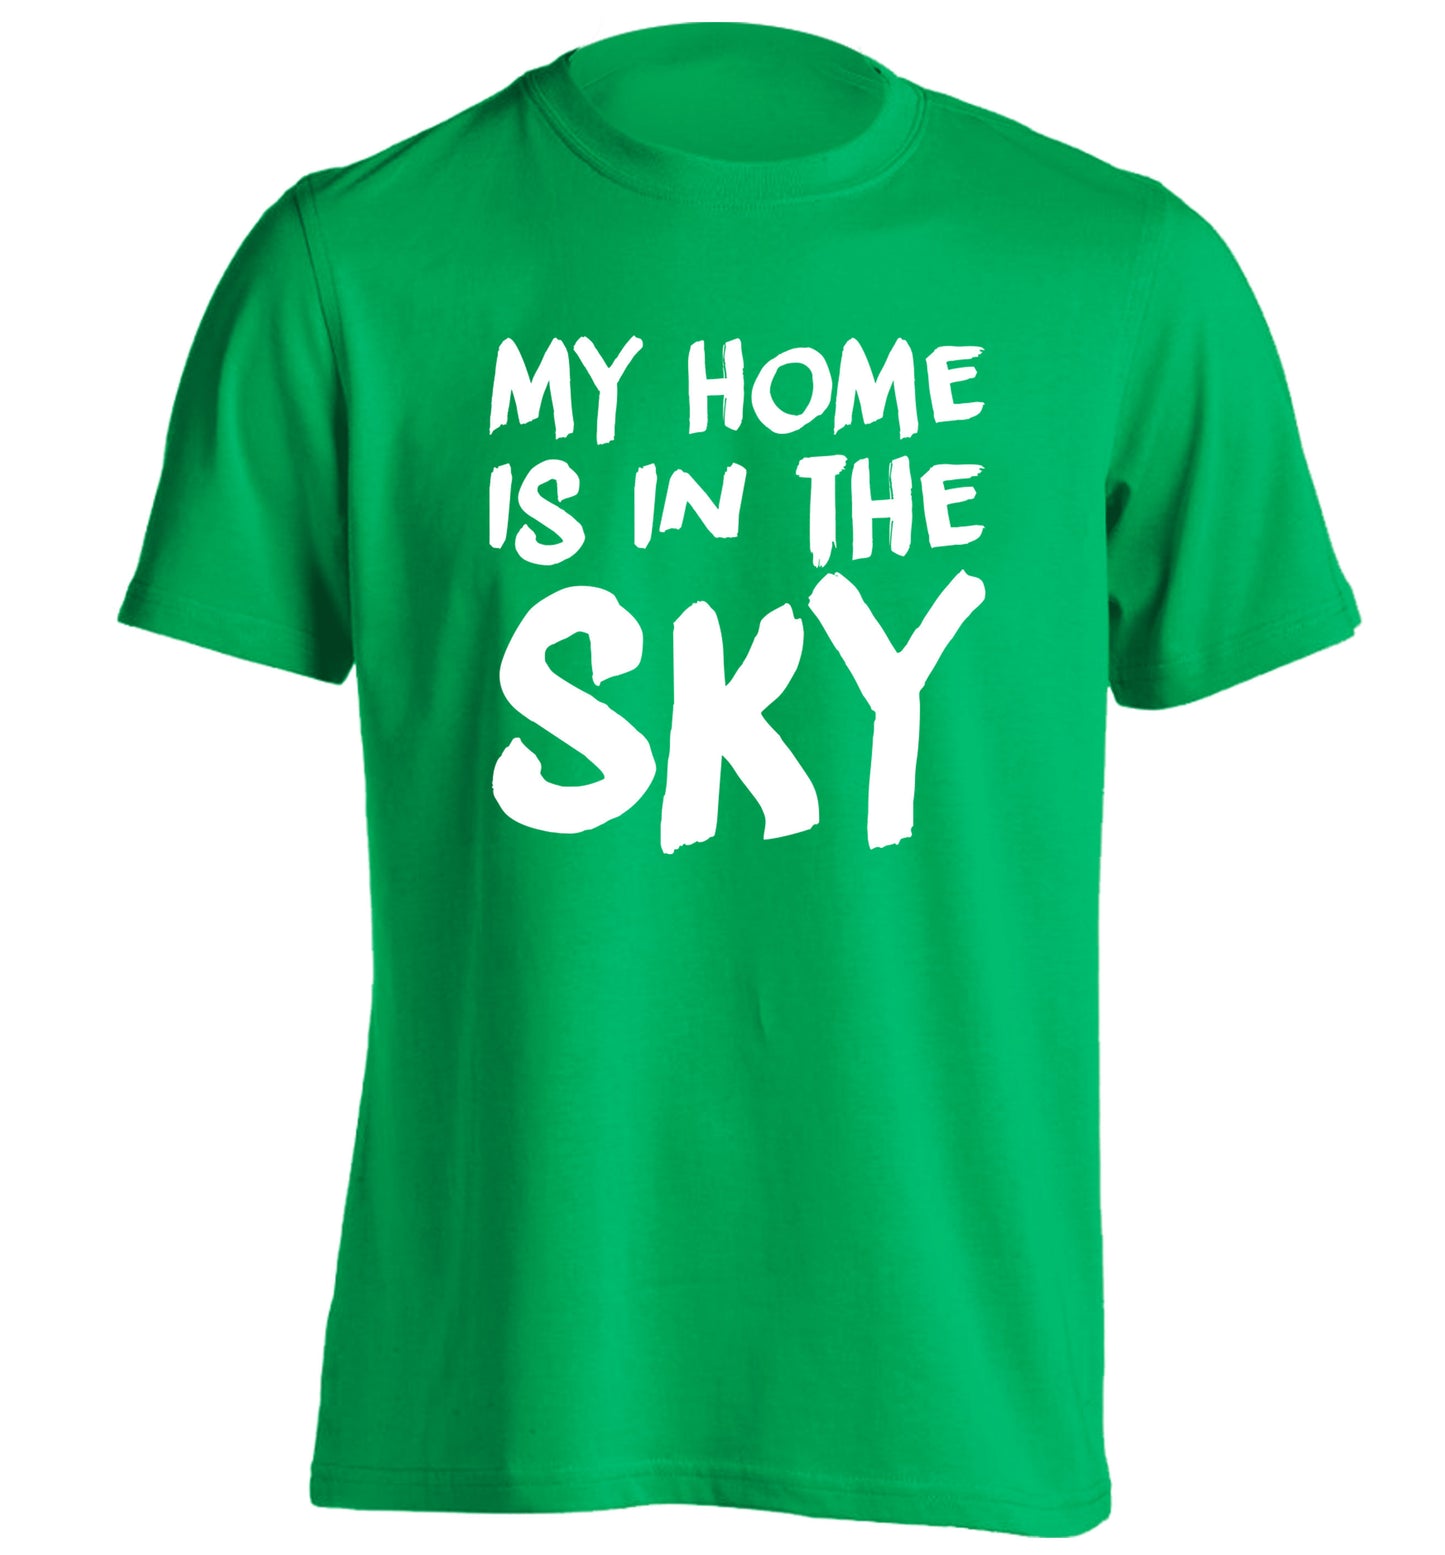 My home is in the sky adults unisex green Tshirt 2XL